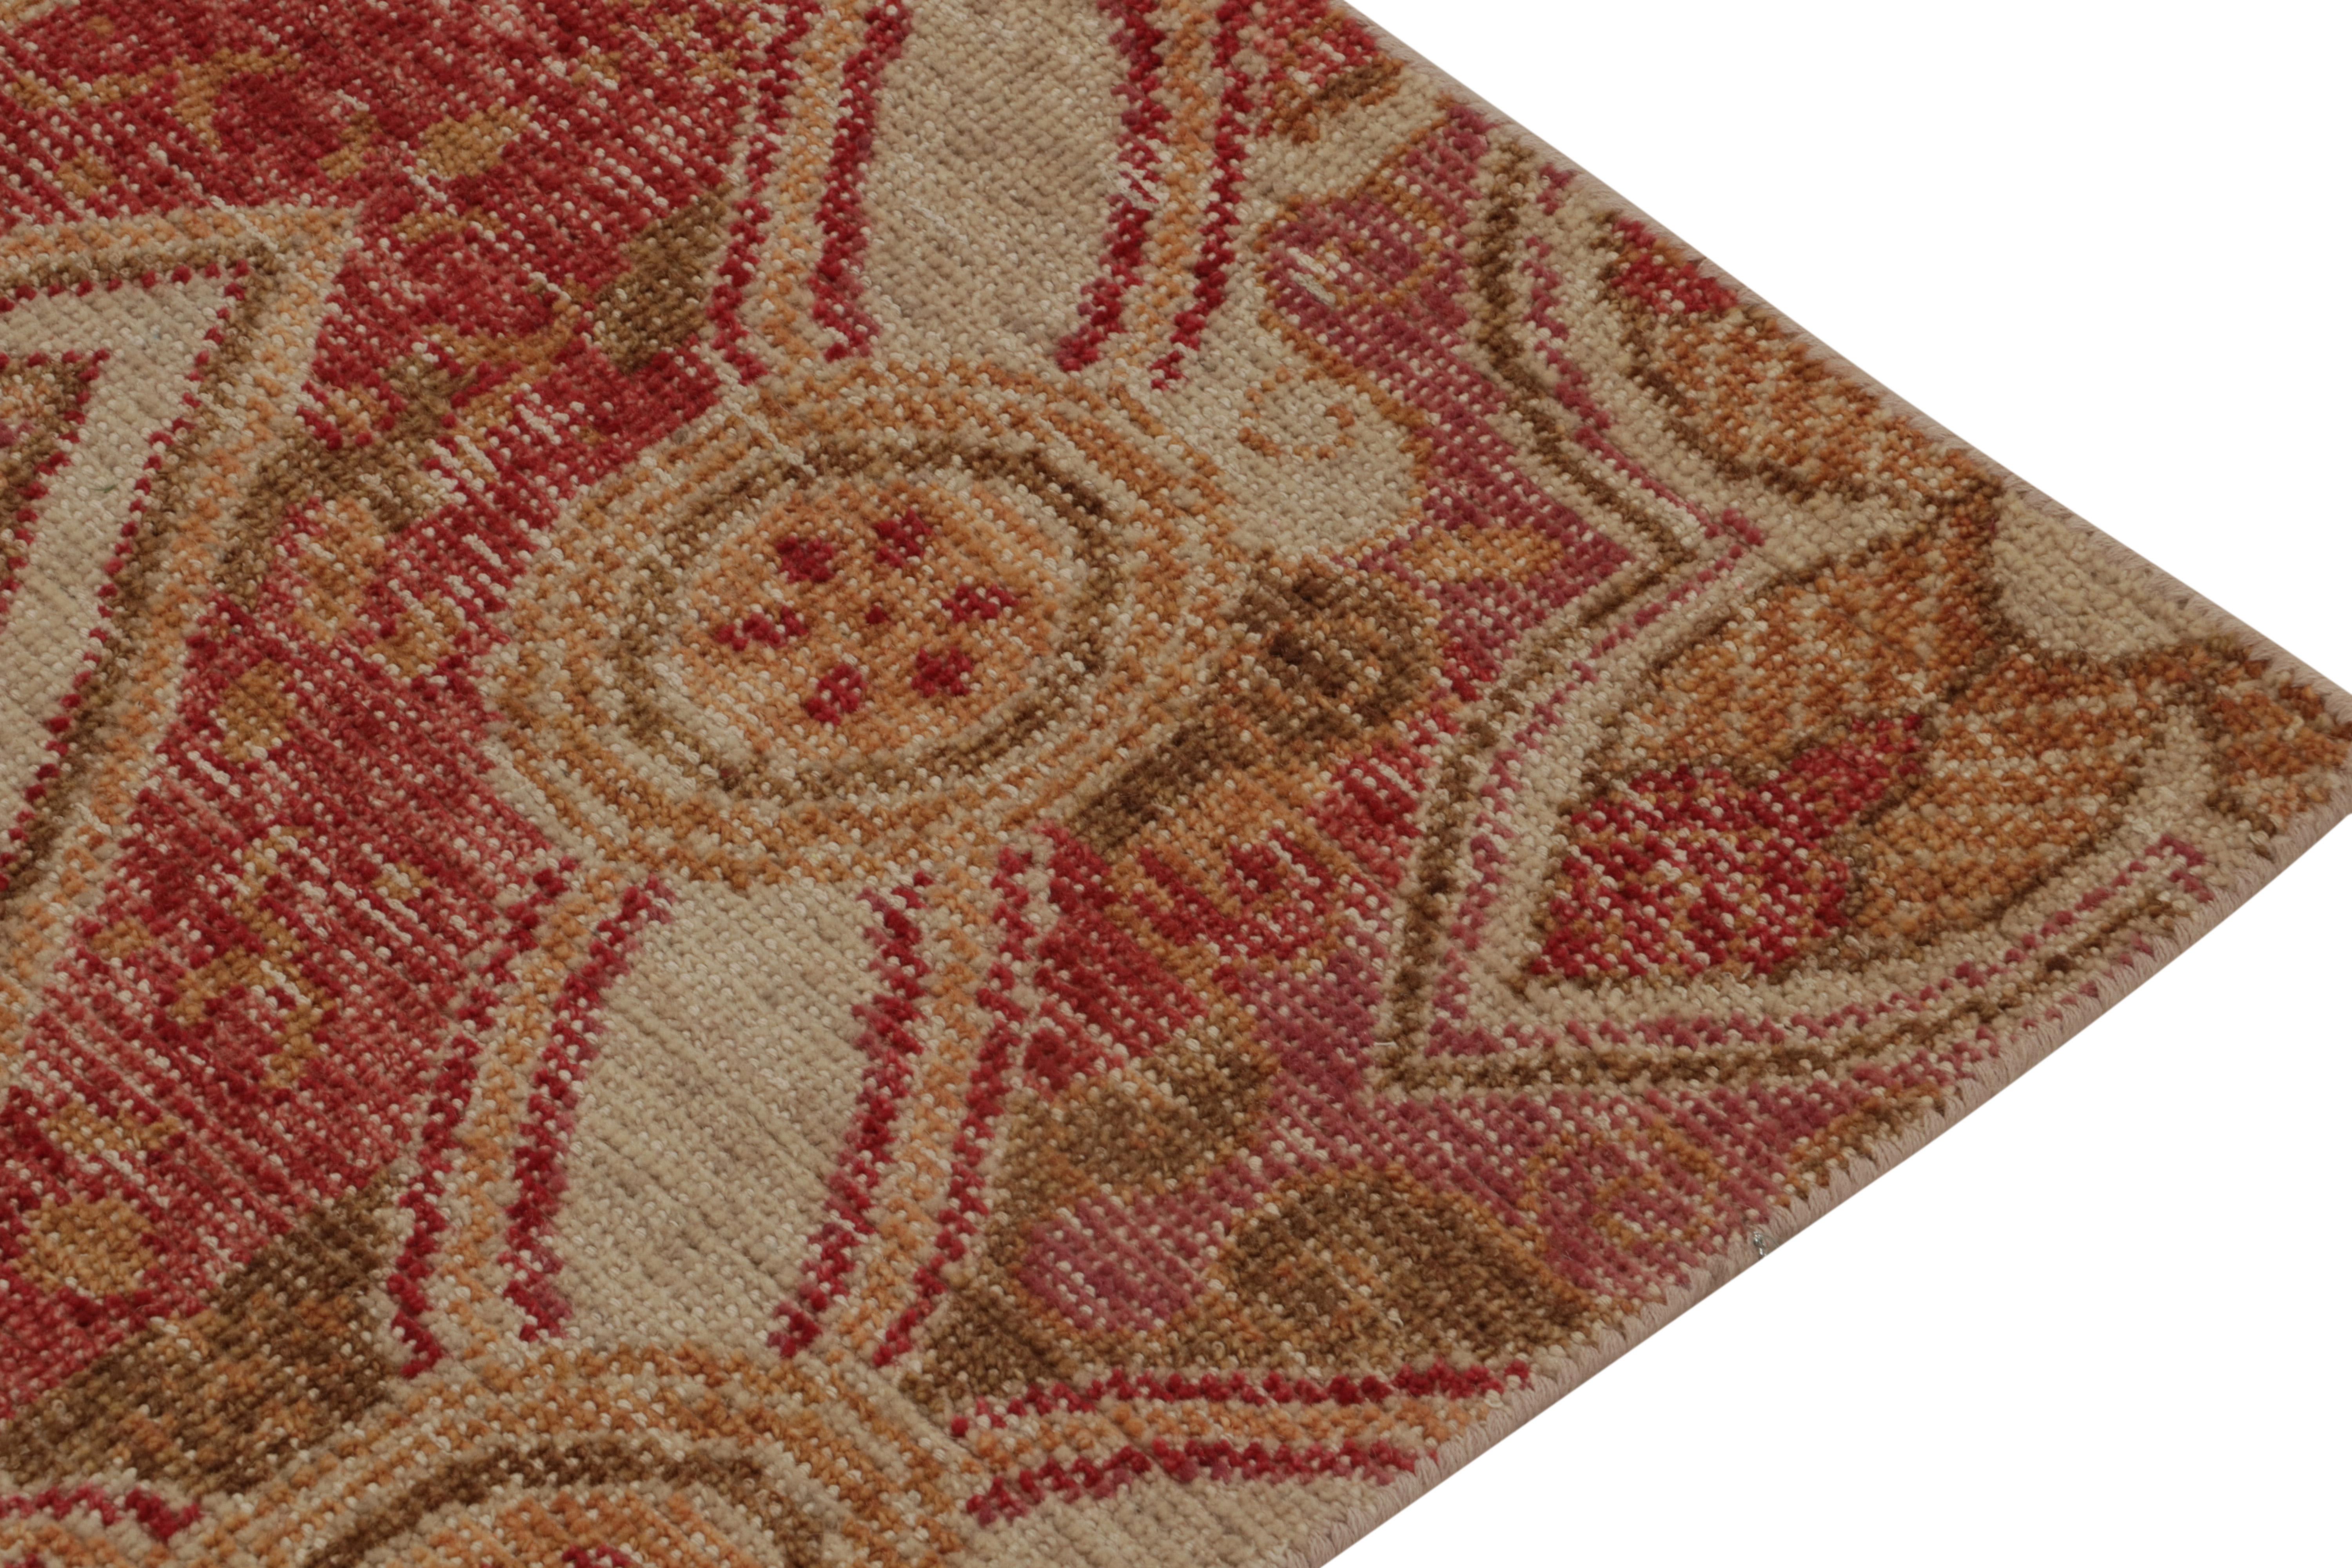 Rug & Kilim’s Distressed Style Runner in Red, Gold and Beige-Brown Trellises In New Condition For Sale In Long Island City, NY